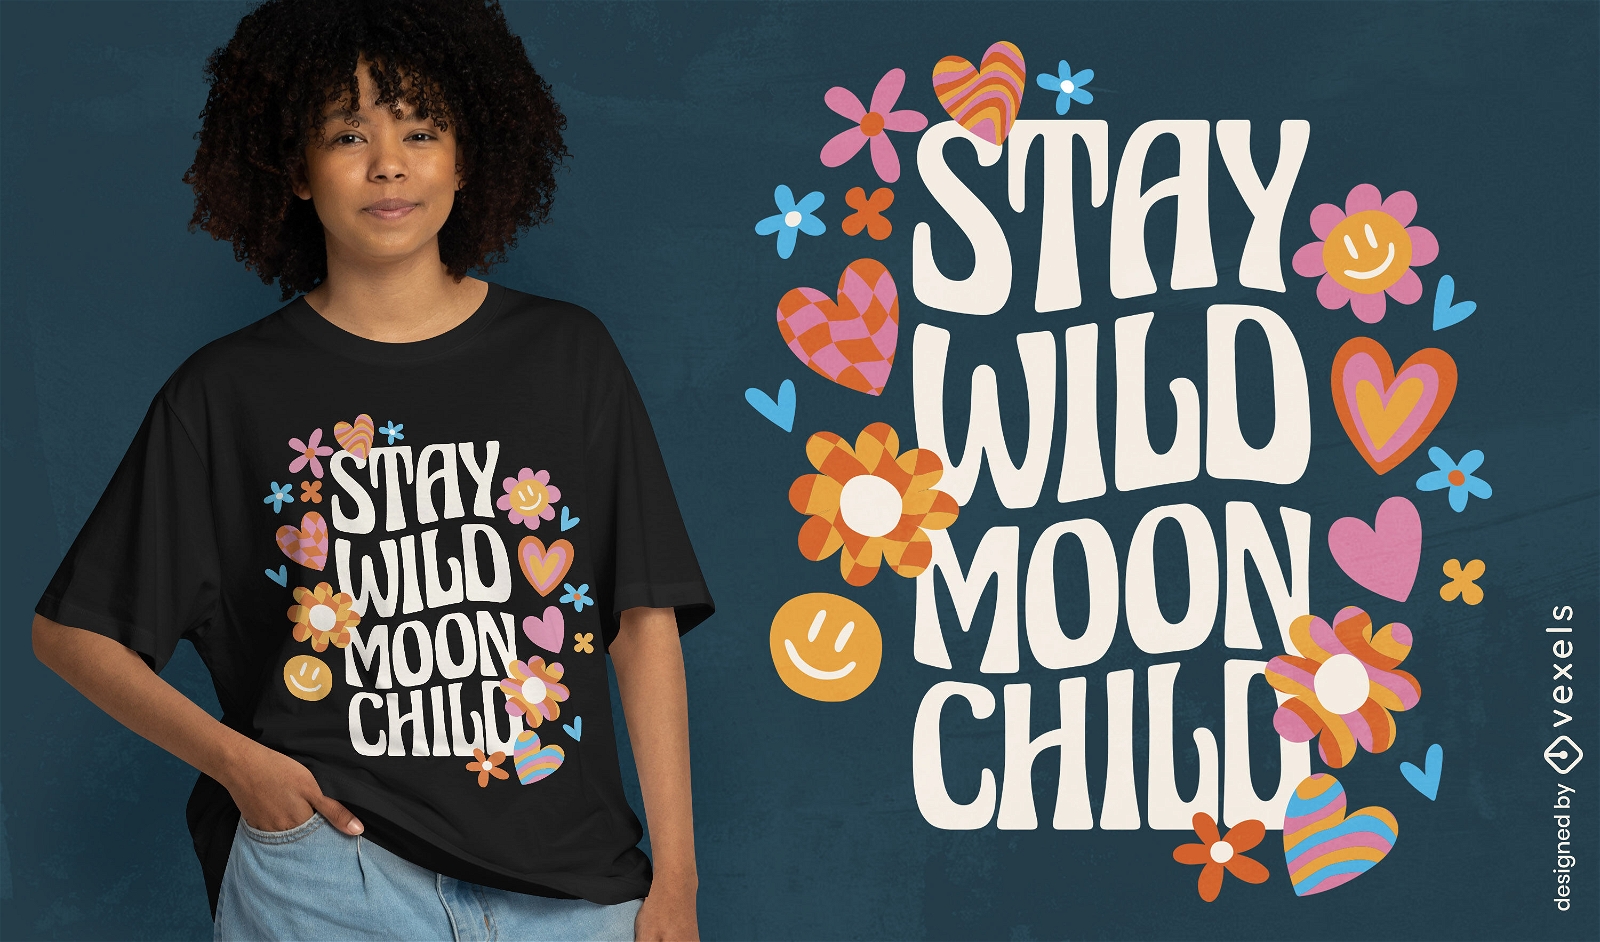 Stay wild moon child quote t-shirt design